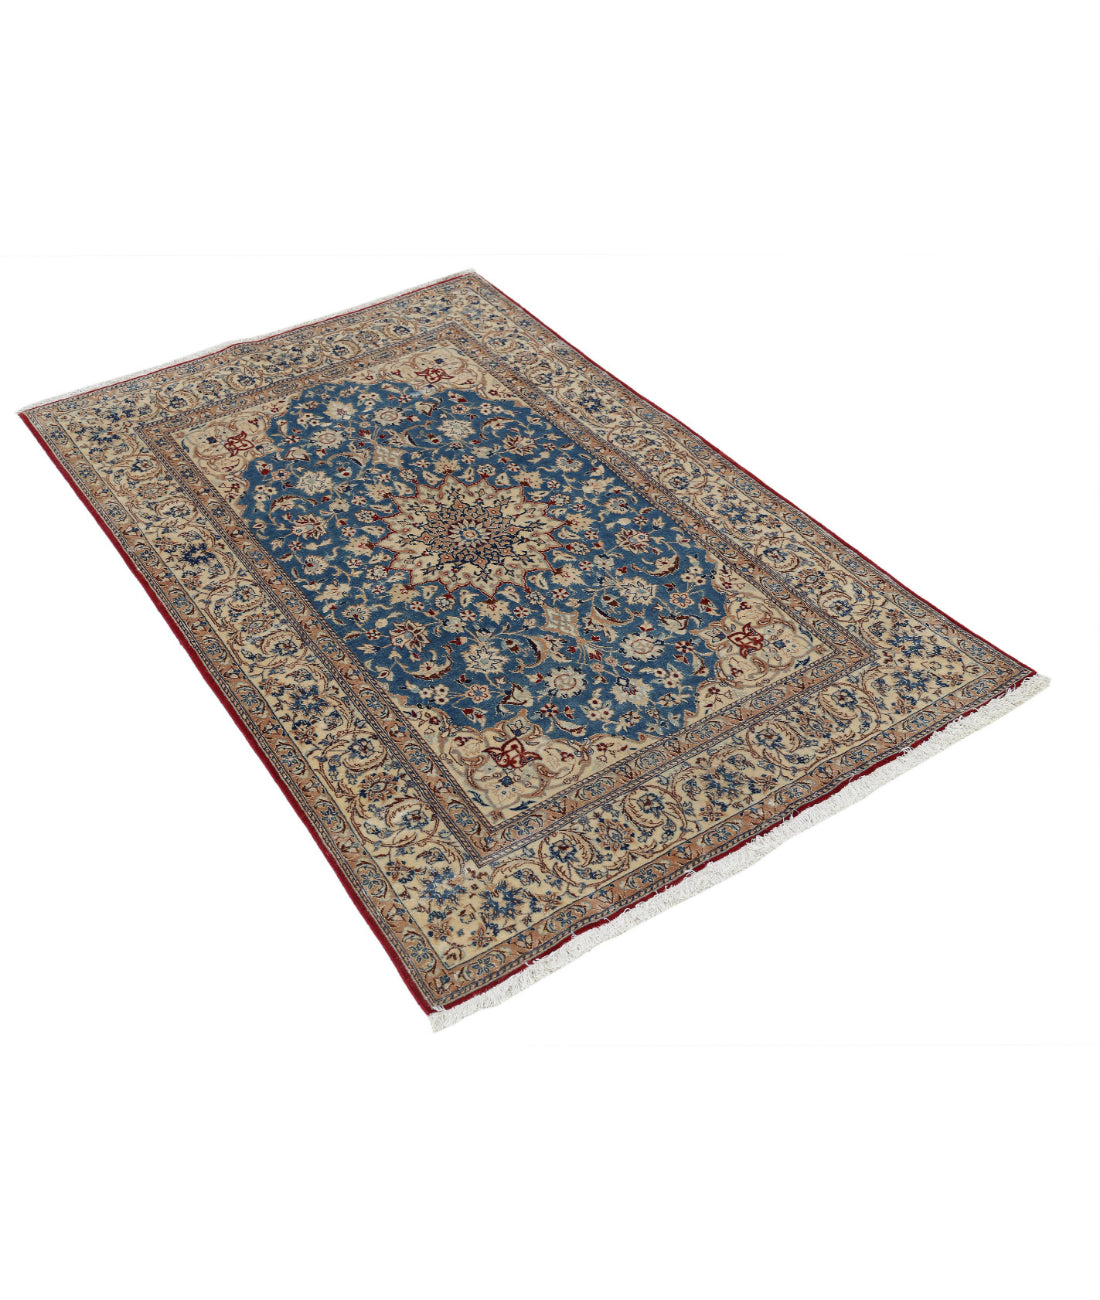 Hand Knotted Masterpiece Persian Isfahan Wool & Silk Rug - 3'5'' x 5'2'' 3'5'' x 5'2'' (103 X 155) / Blue / Ivory